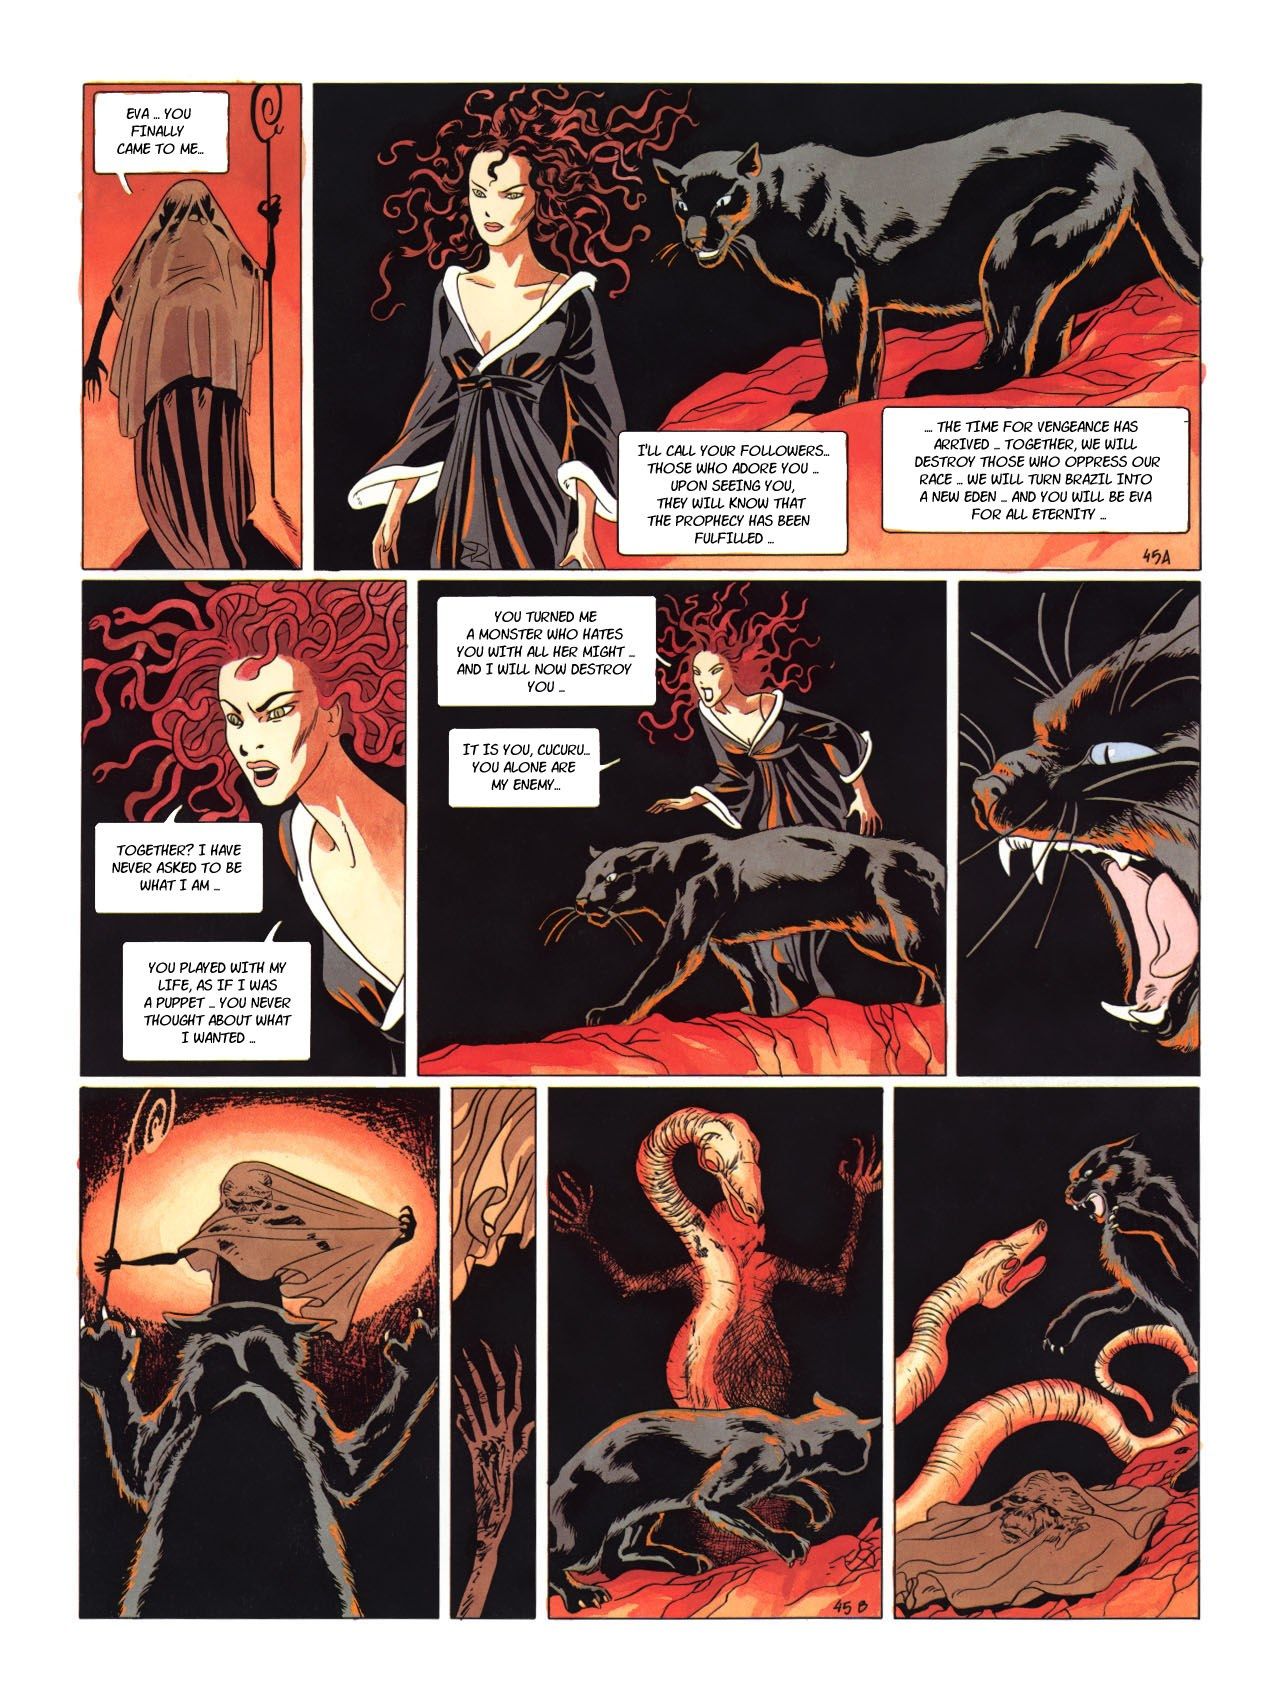 Eva Medusa Ch.3 You Are the Love by Ana Miralles page 47